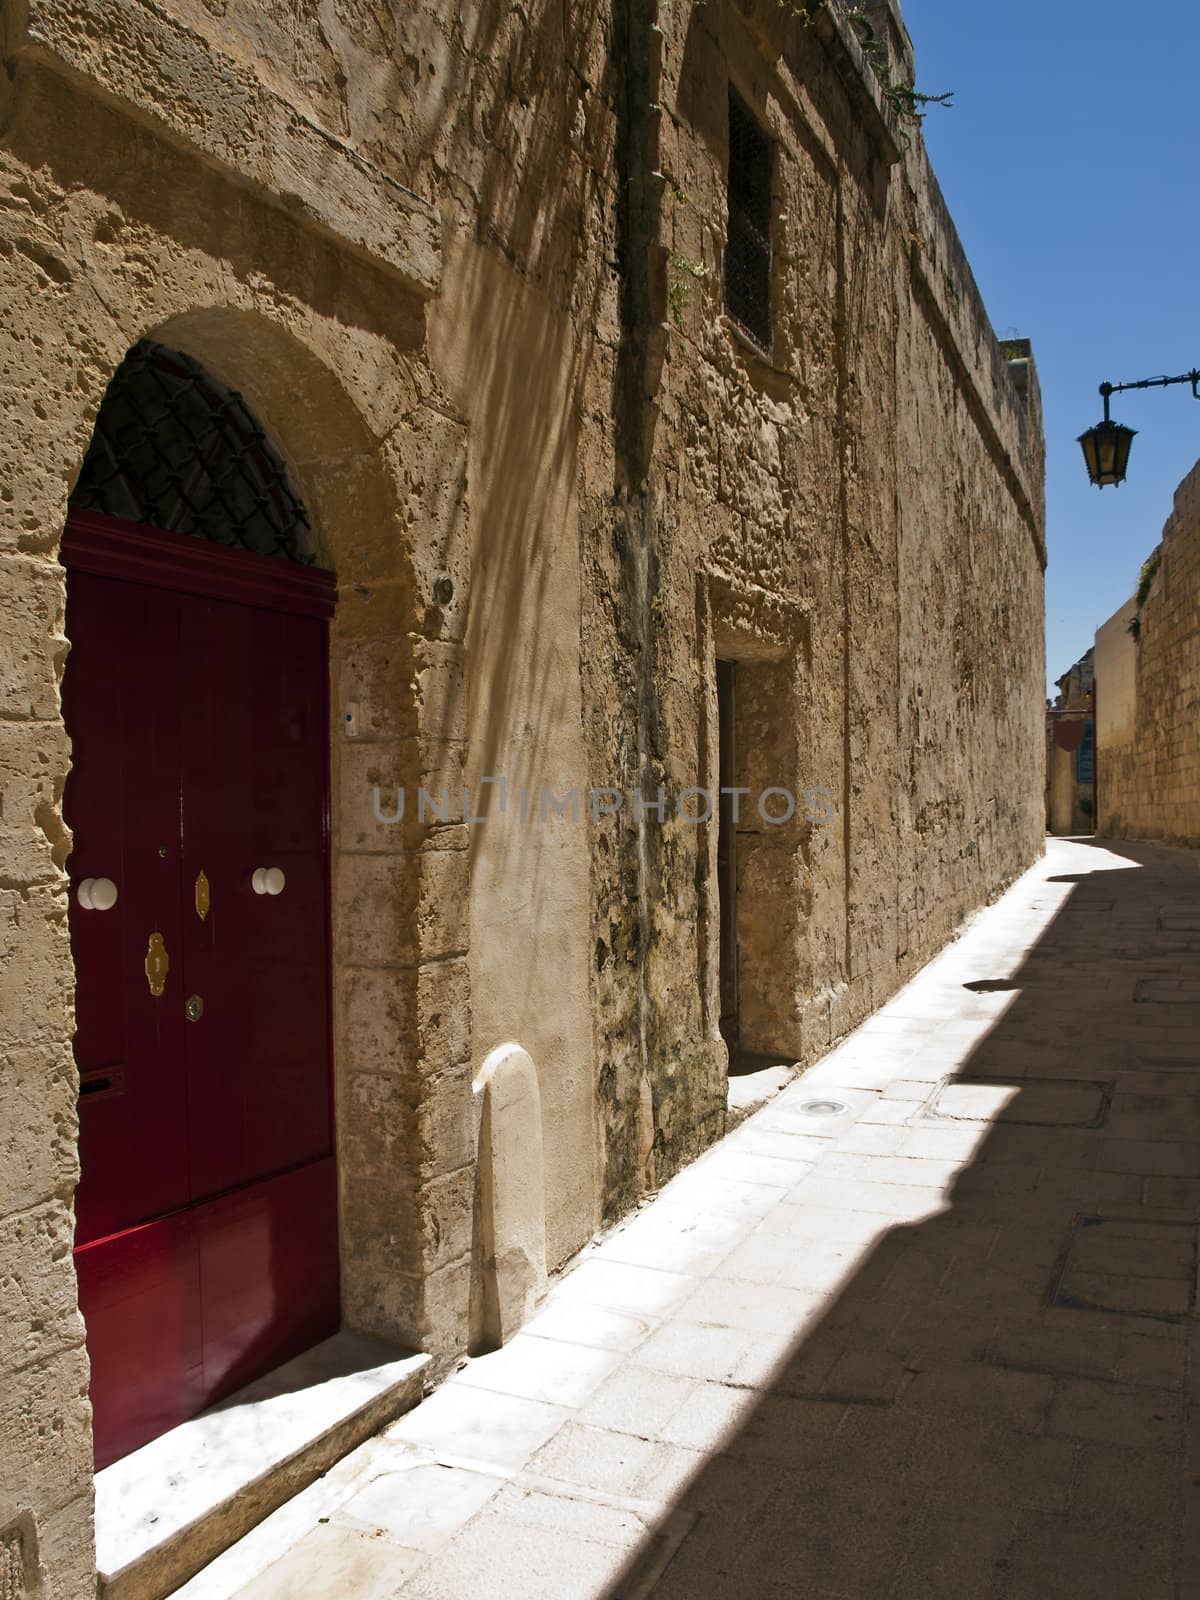 Medieval home in one of the narrow streets in the city of Mdina in Malta